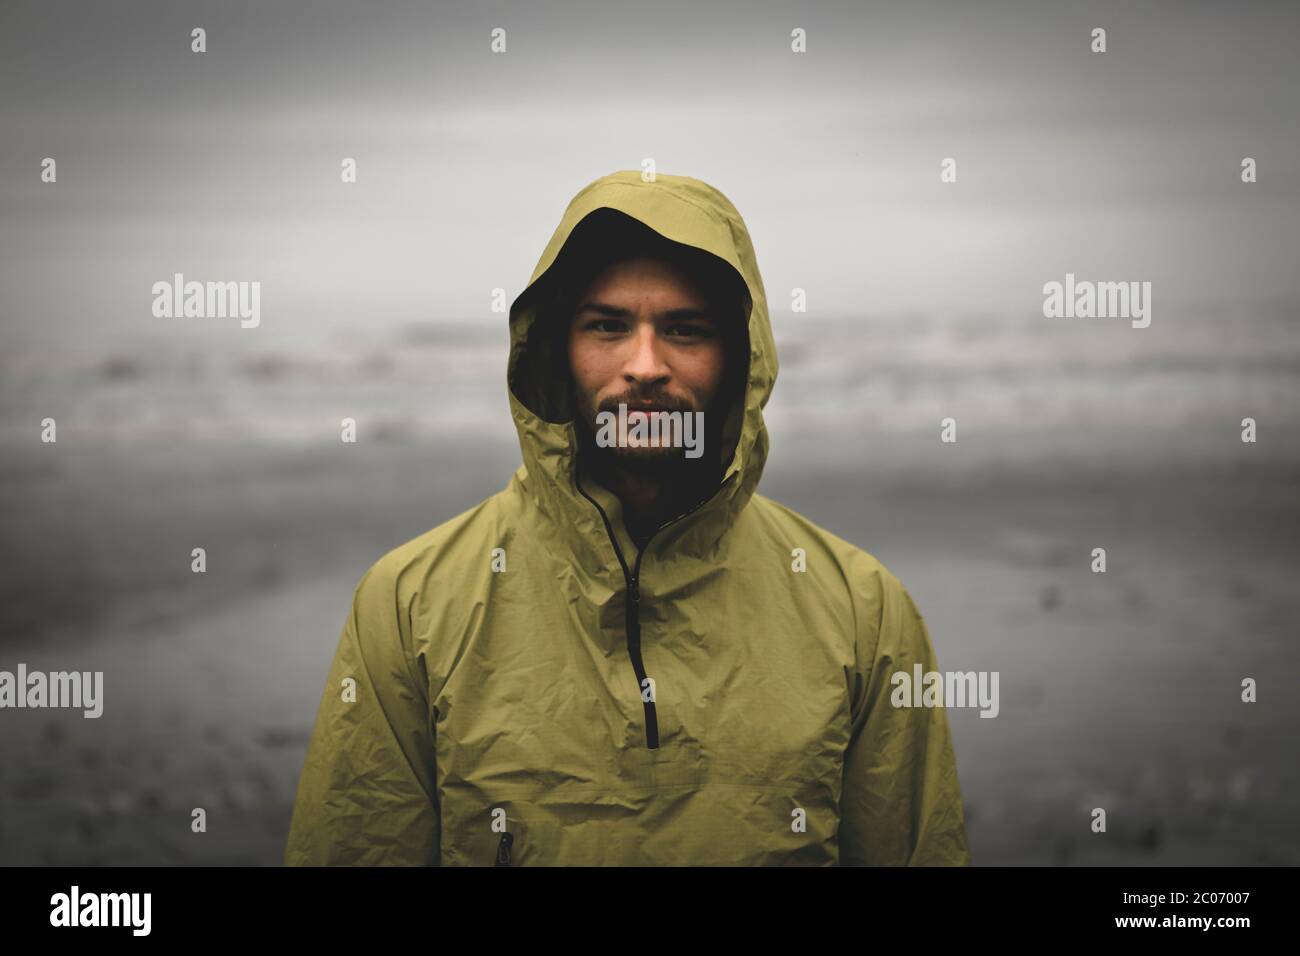 Portrait shot of adventurous looking male during bad weather Stock Photo